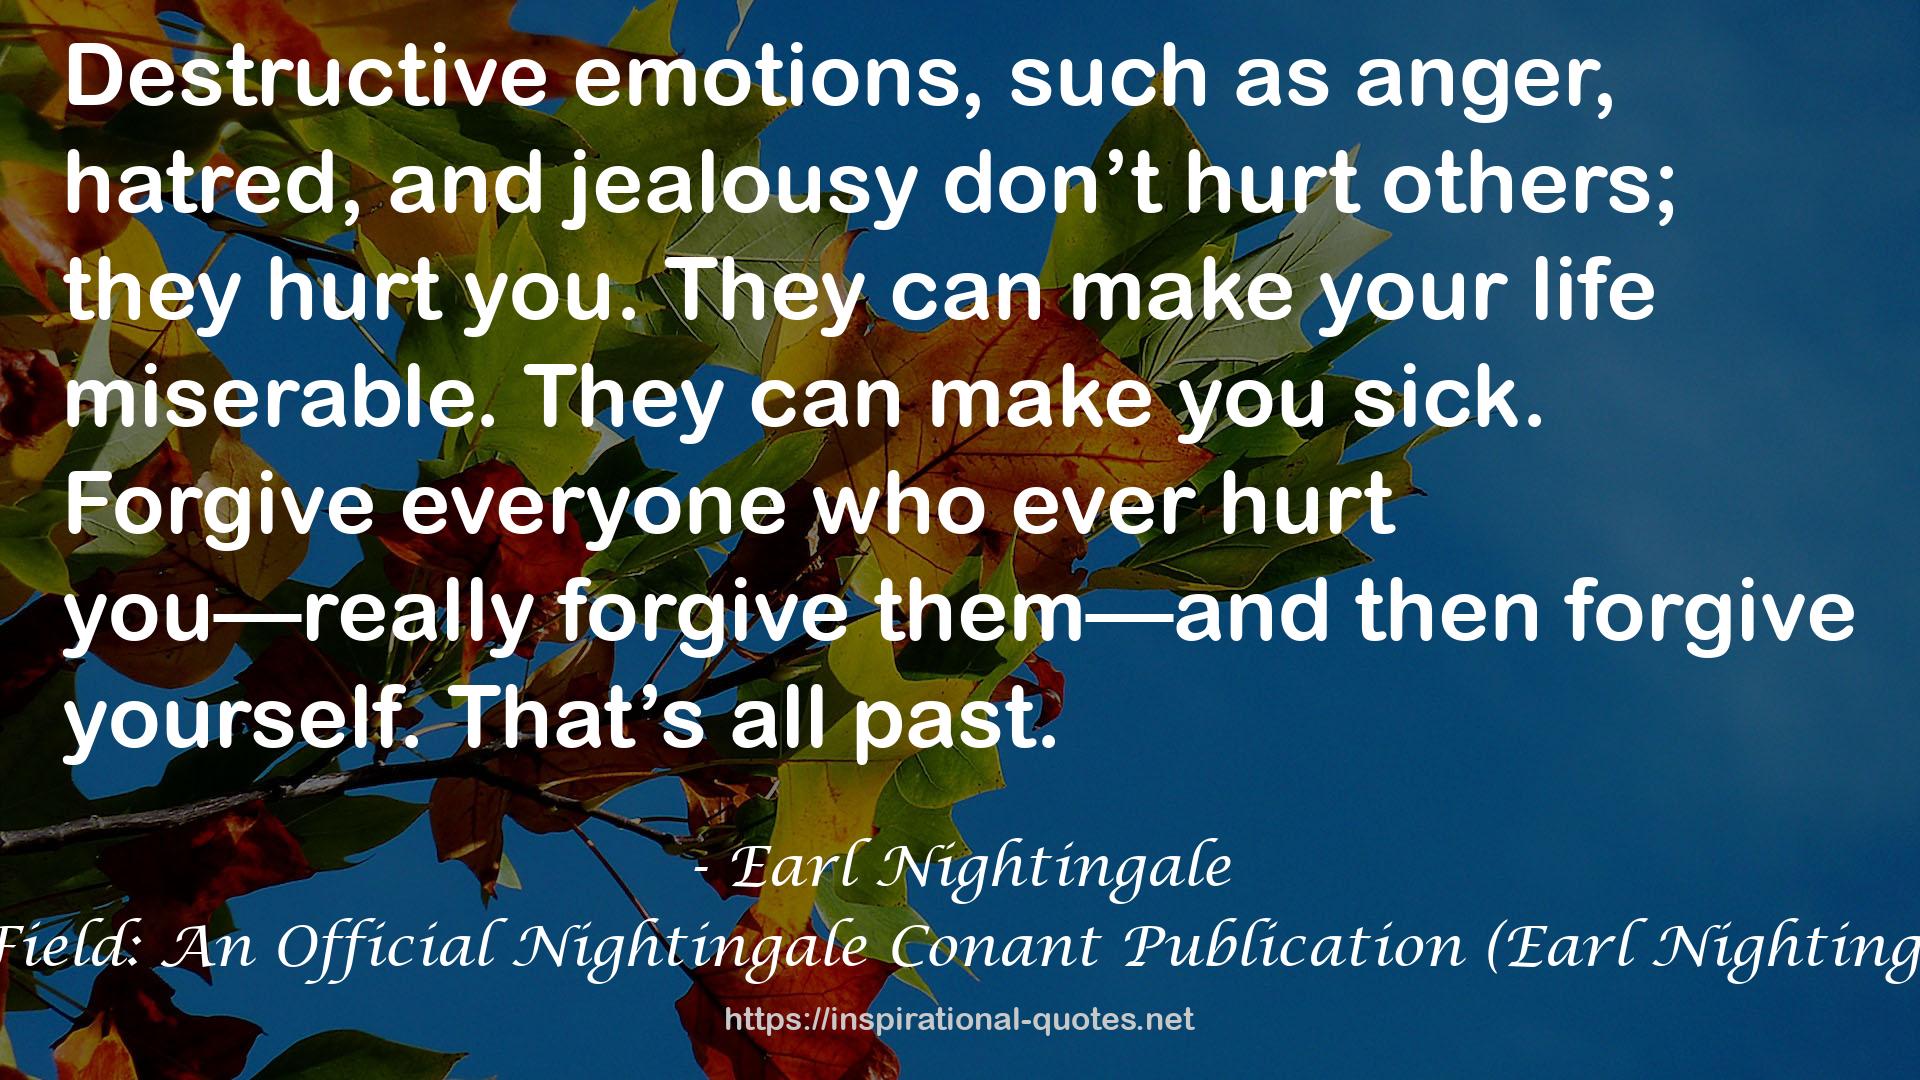 Lead the Field: An Official Nightingale Conant Publication (Earl Nightingale Series) QUOTES